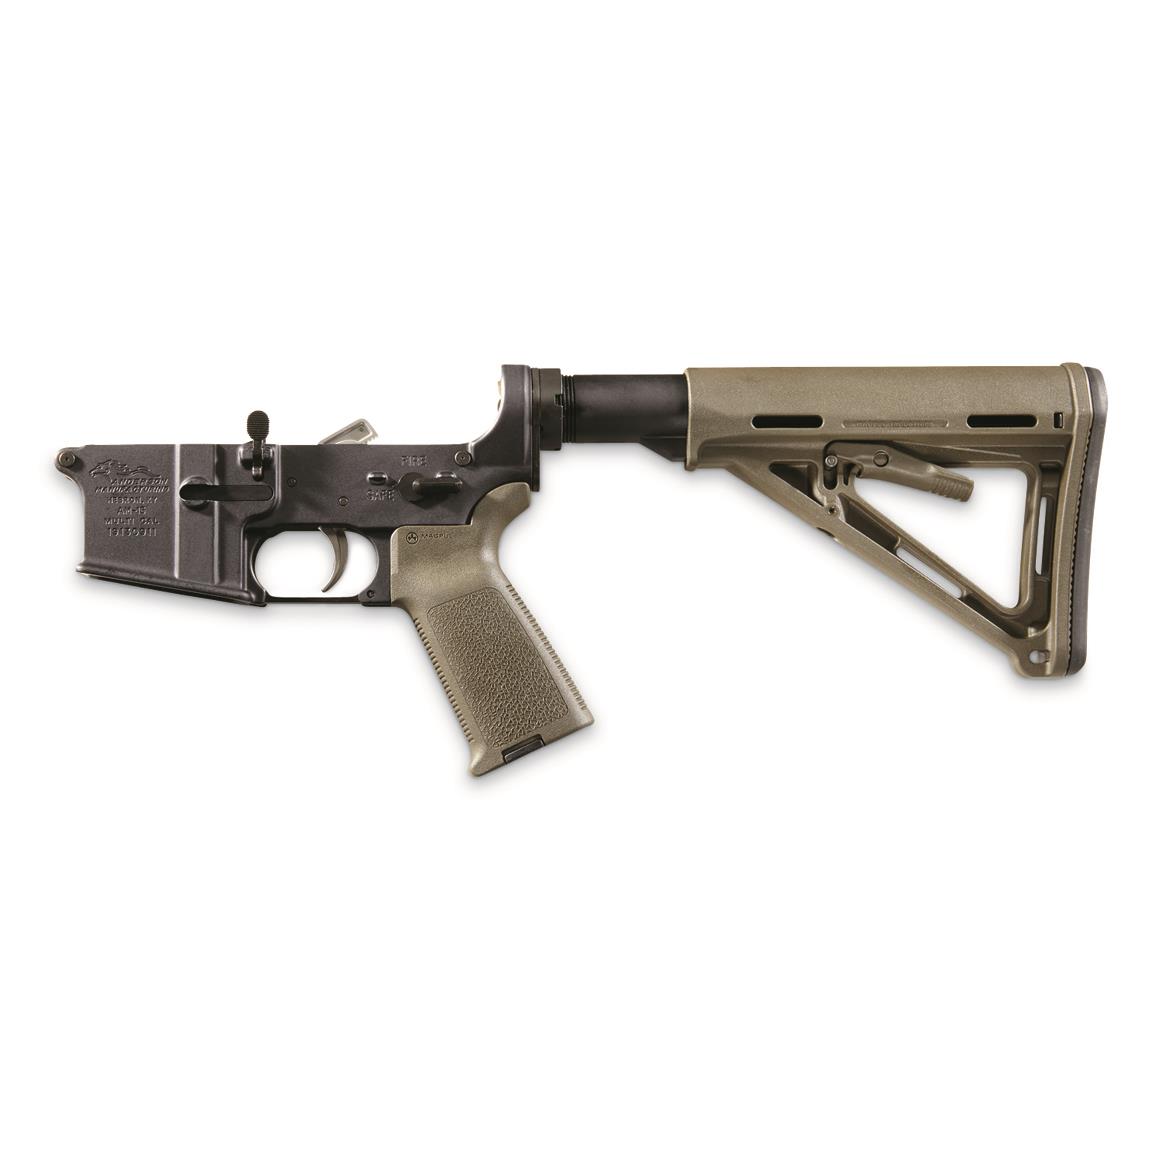 Anderson Complete Assembled AR-15 Lower Receiver, Multi-Cal, Magpul Stock and Grip, Olive Drab